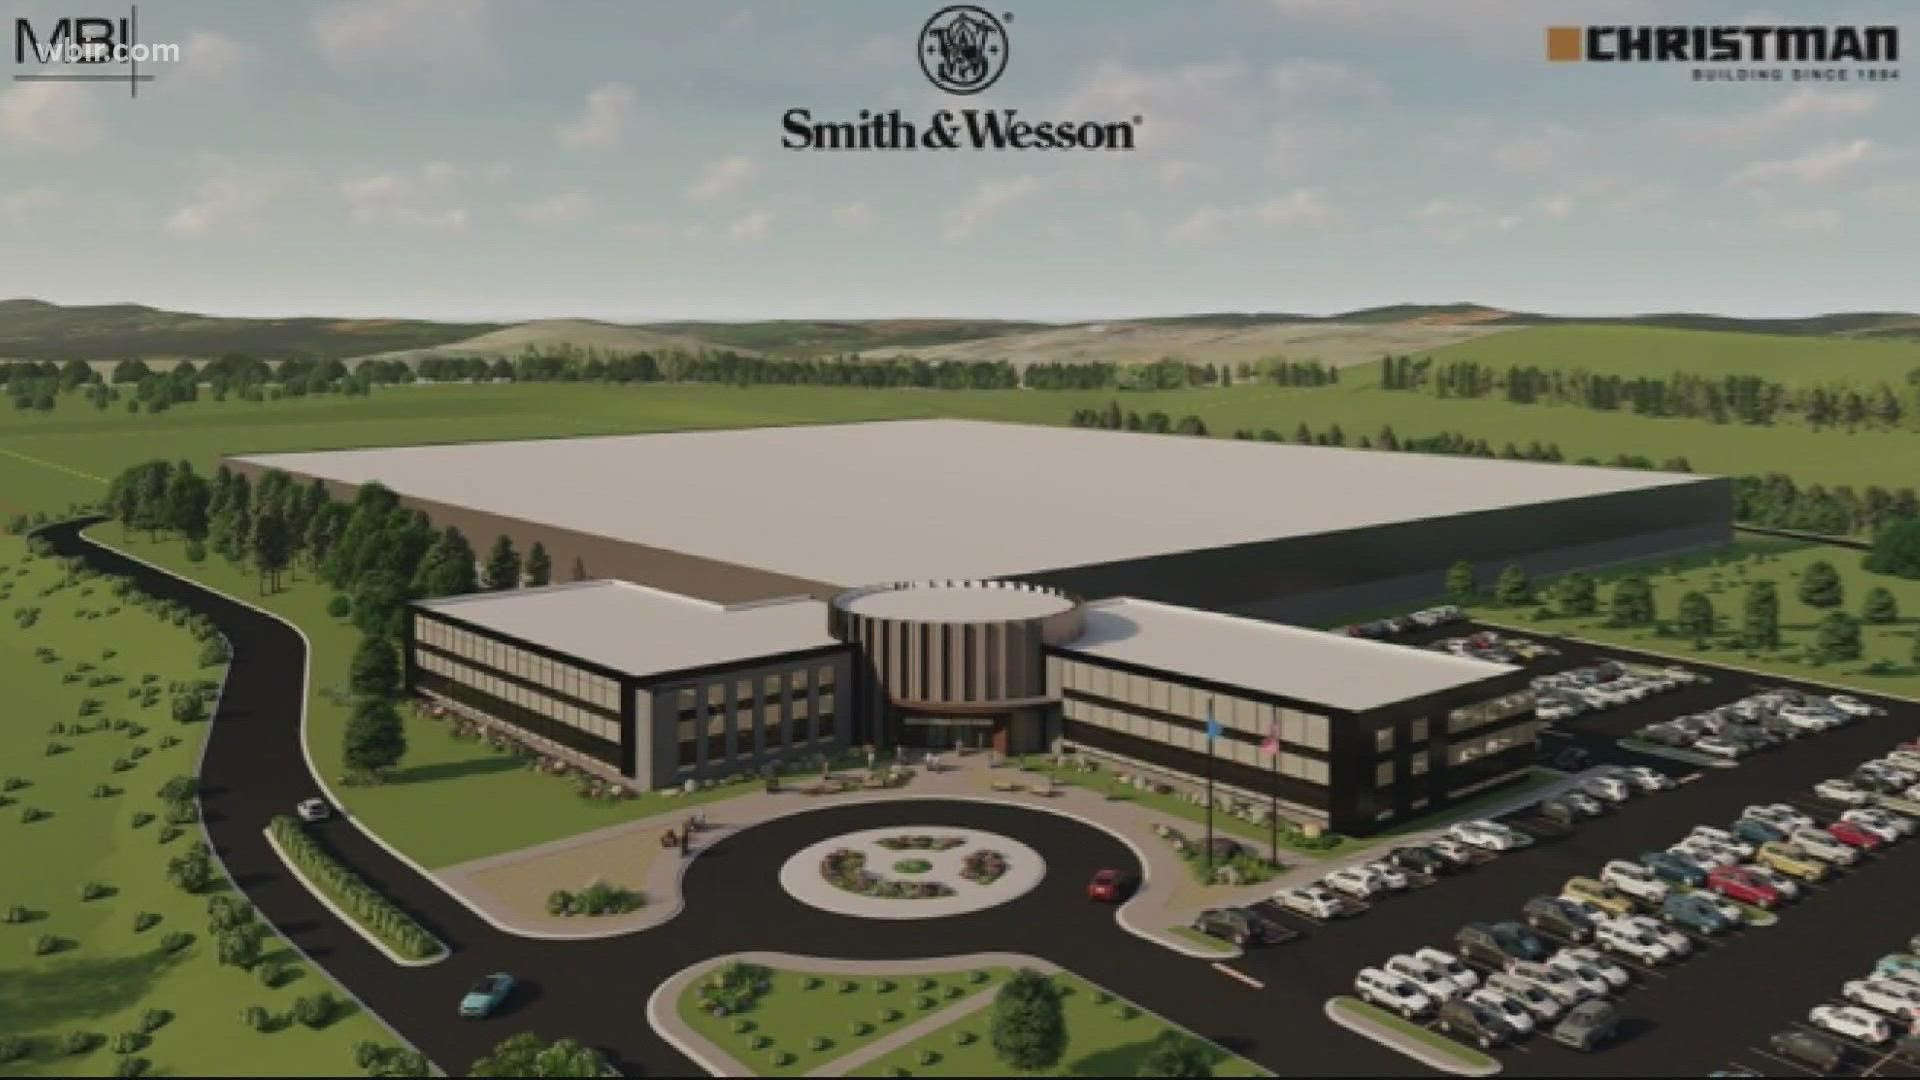 Smith & Wesson's new headquarters will be located in Partnership Park North in Maryville. The state said the company plans to break ground by the end of the year.